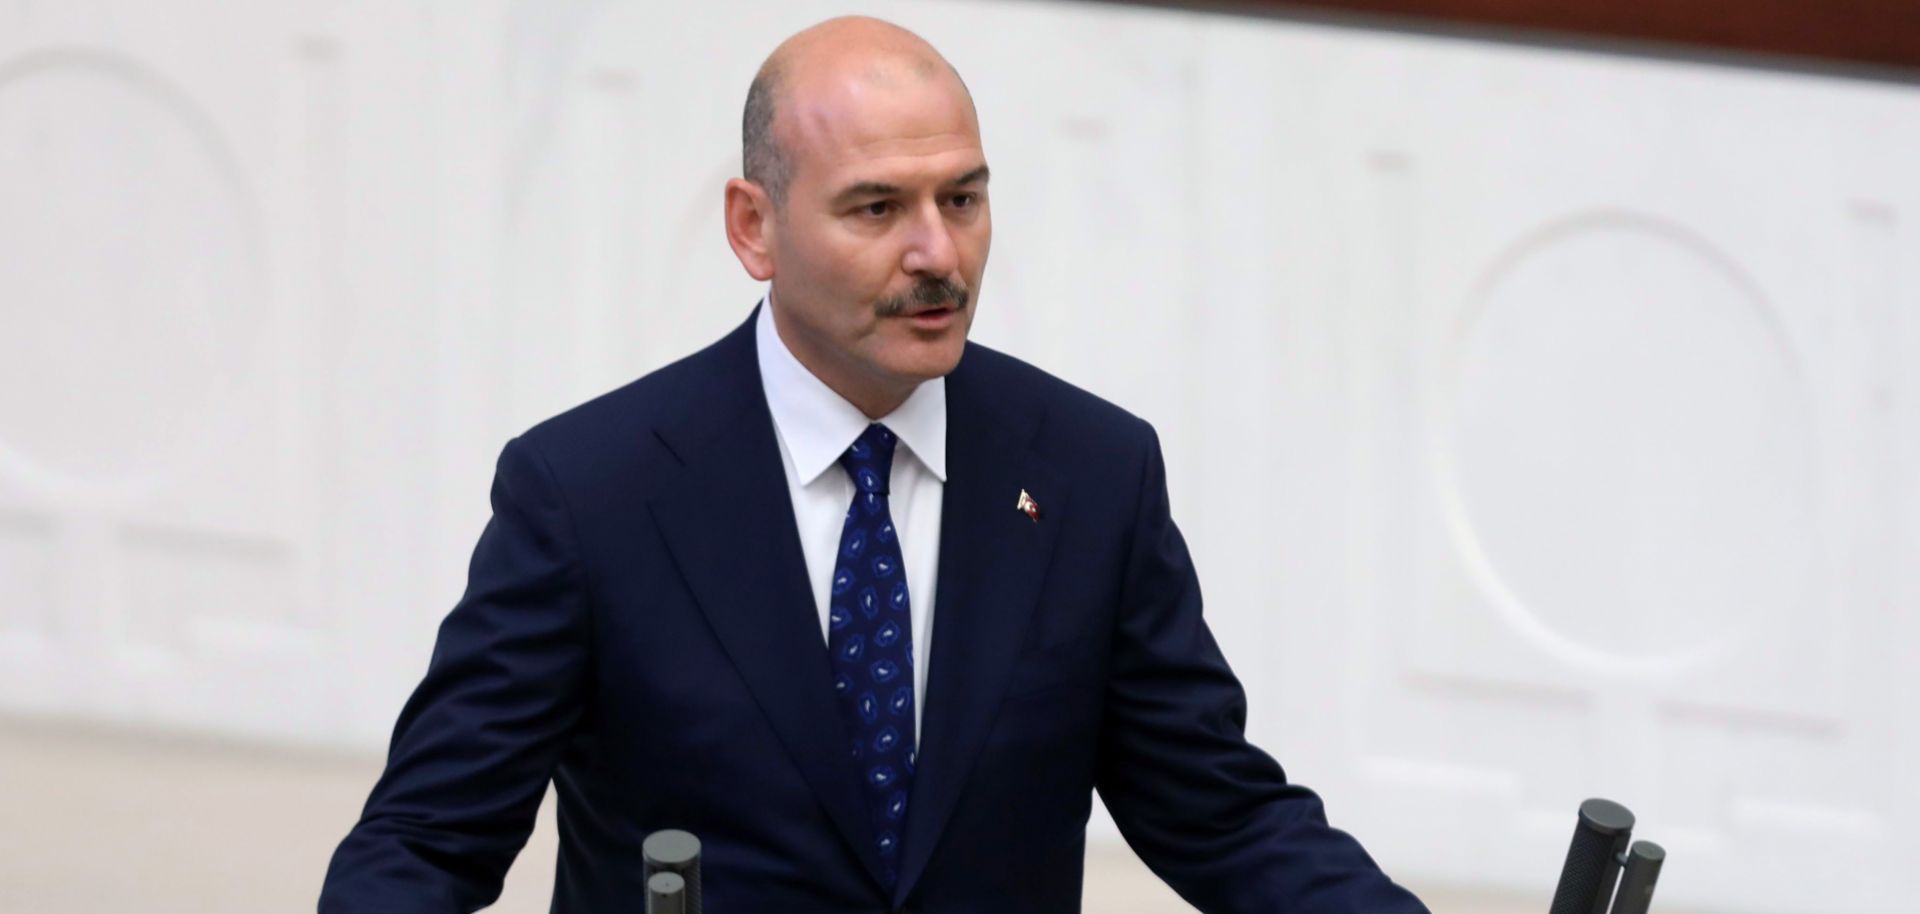 Turkish Interior Minister Suleyman Soylu is pictured here in Ankara, Turkey, on July 10, 2018.